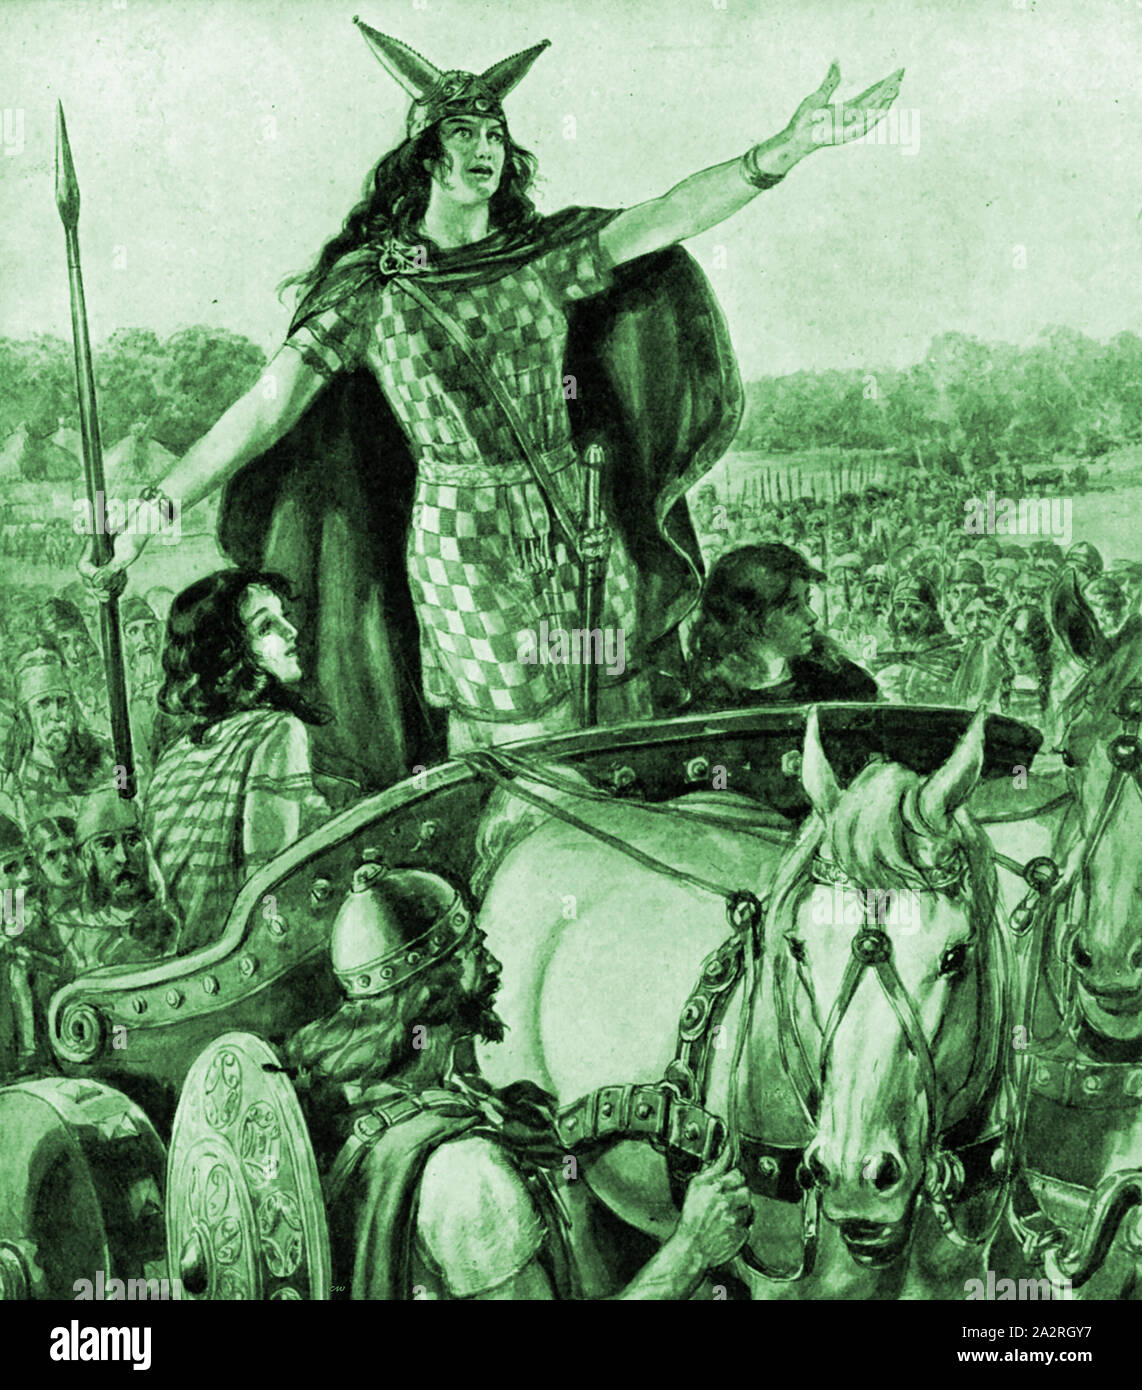 A 1930's illustration of Boudicca / Boudicea/ Boudica / Boudicca  Queen of the Icini tribe in her chariot inciting the British to mutiny against the Roman invaders. She led the uprising against the occupying forces of the Roman Empire in AD 60 or 61 Stock Photo